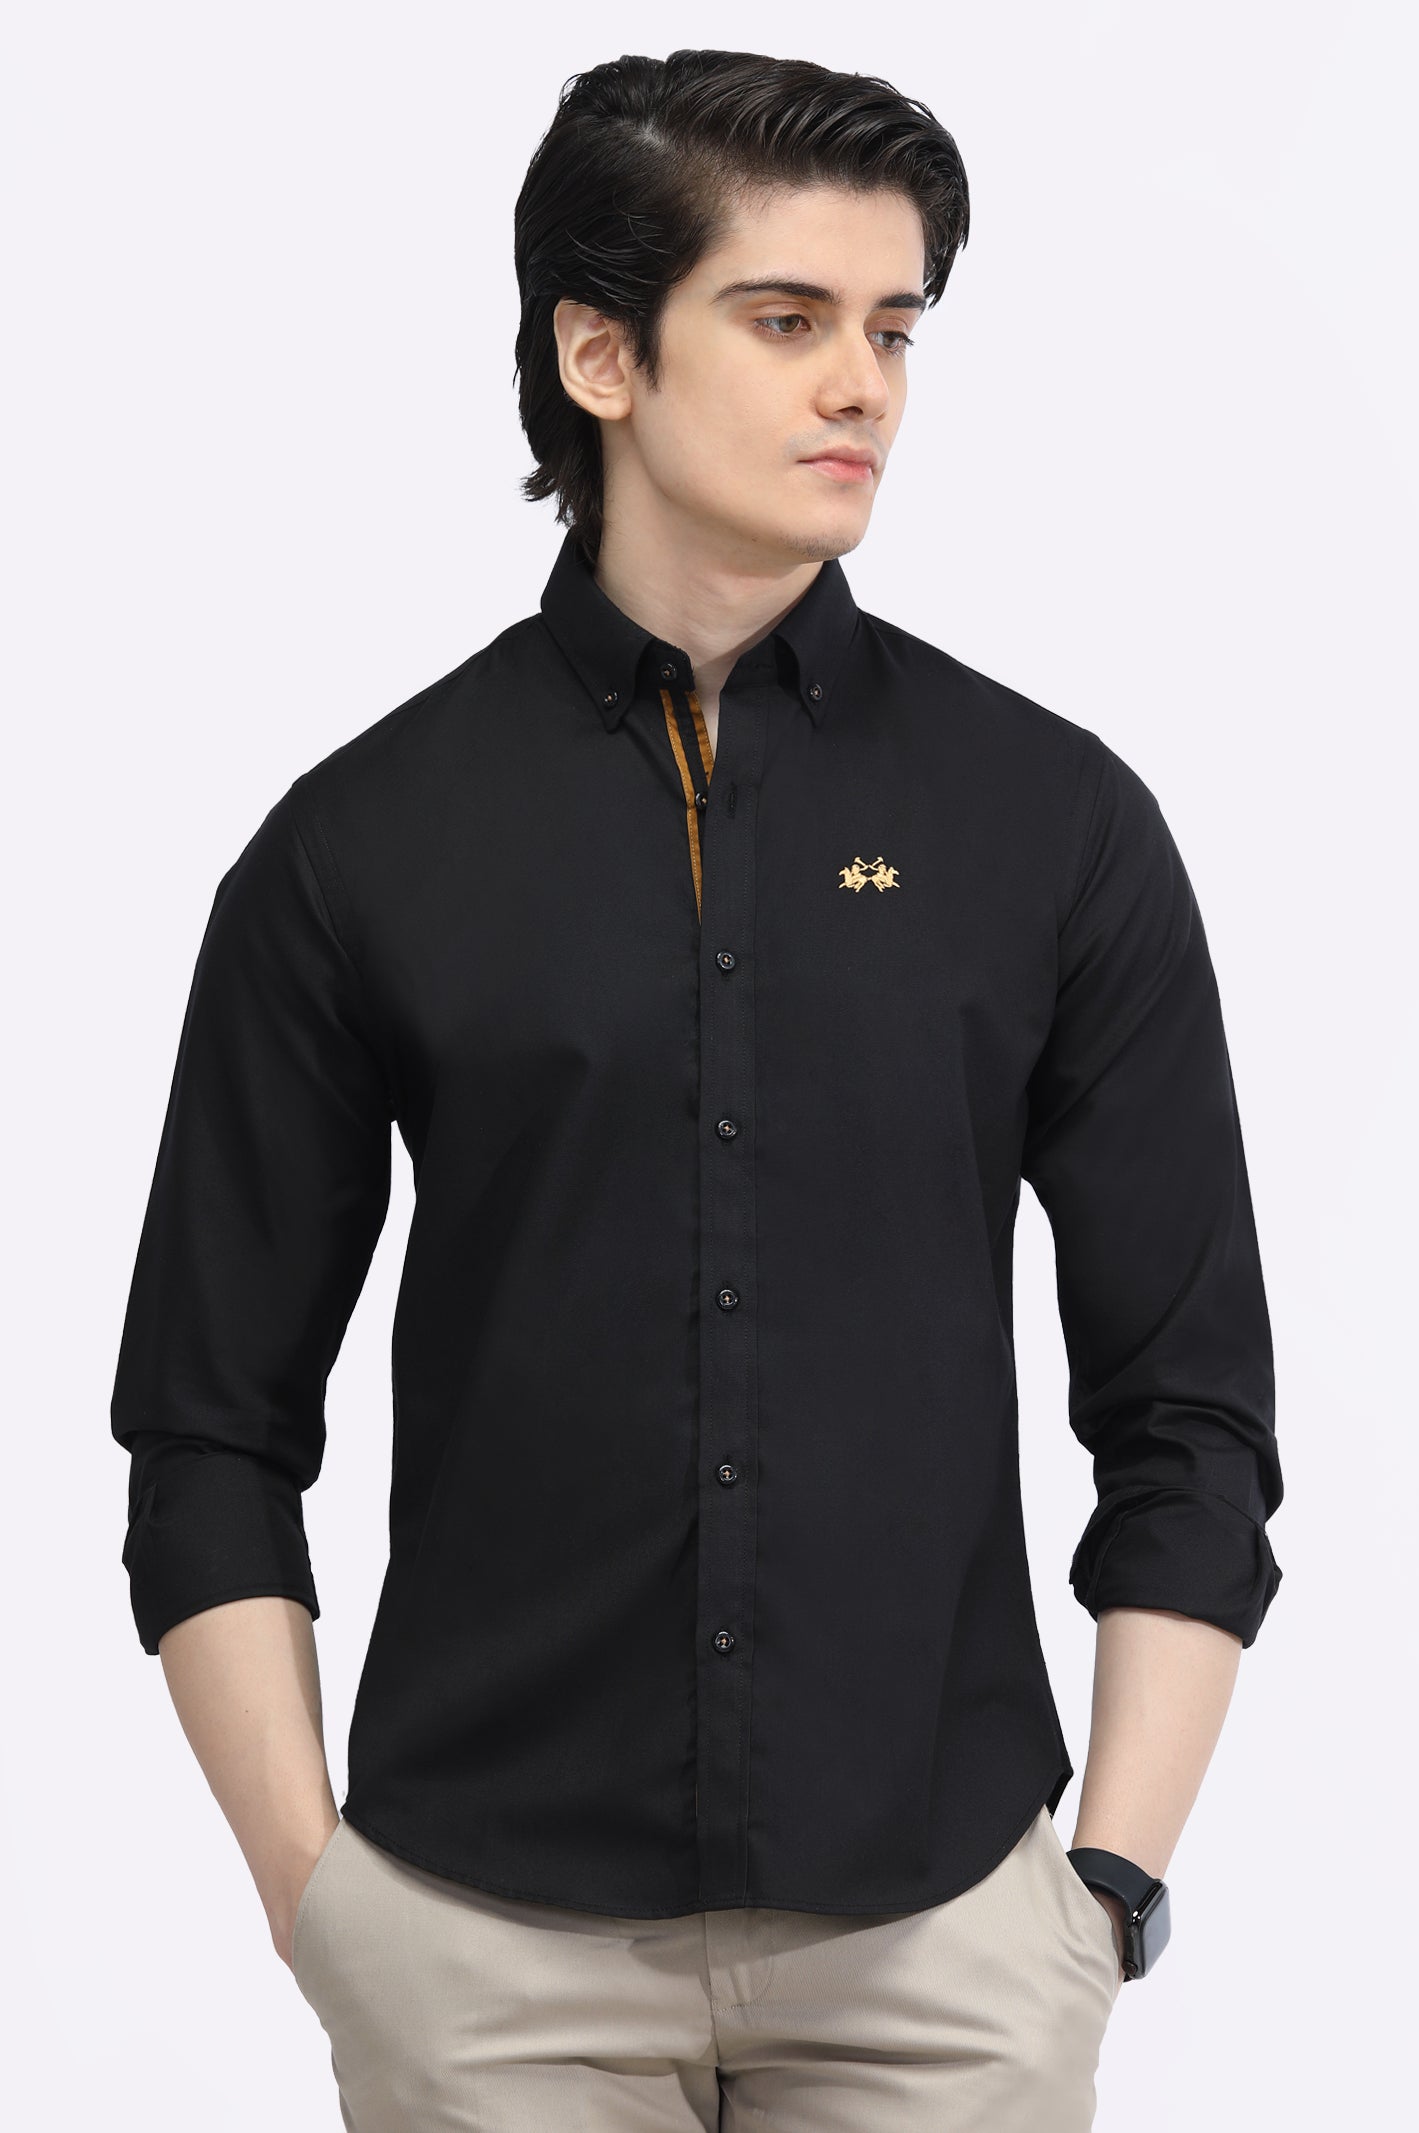 Black Textured Casual Shirt From Diners